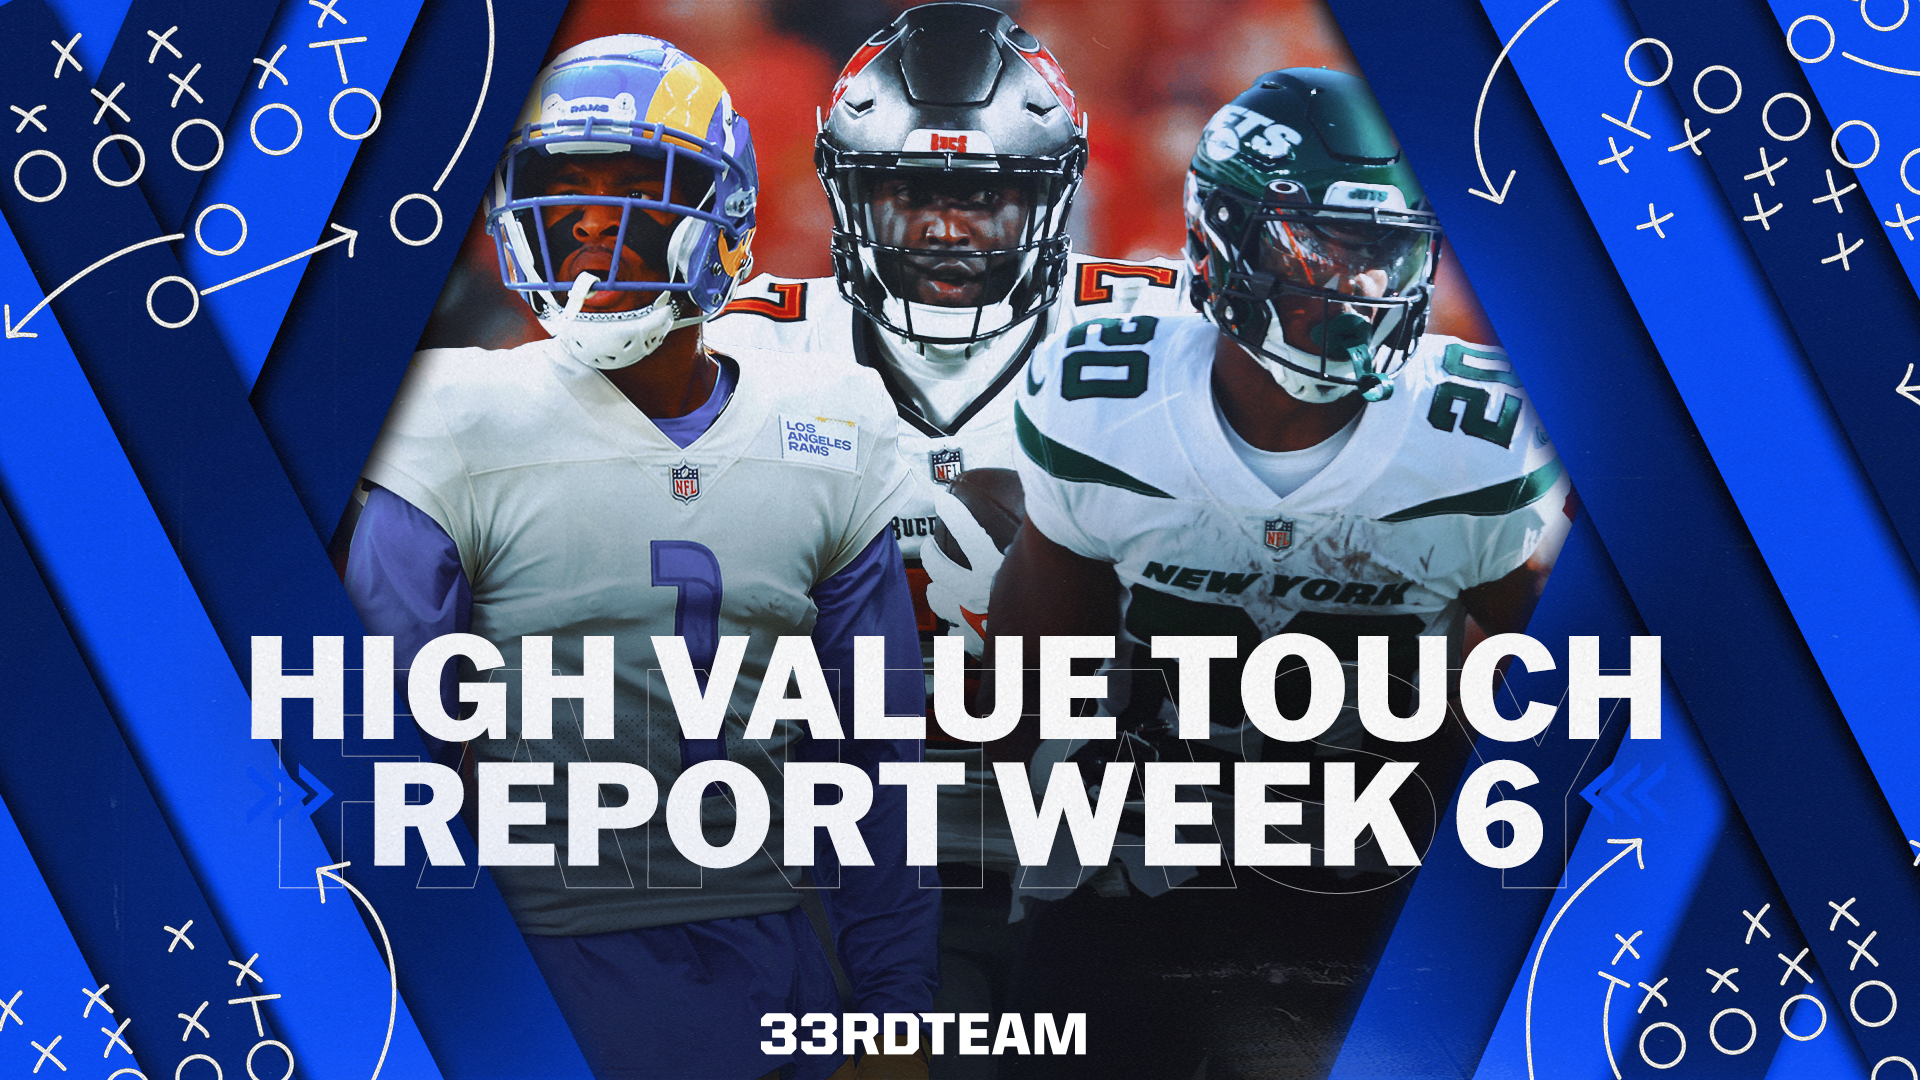 High-Value Touch Report: Week 6 Rushing & Receiving Data